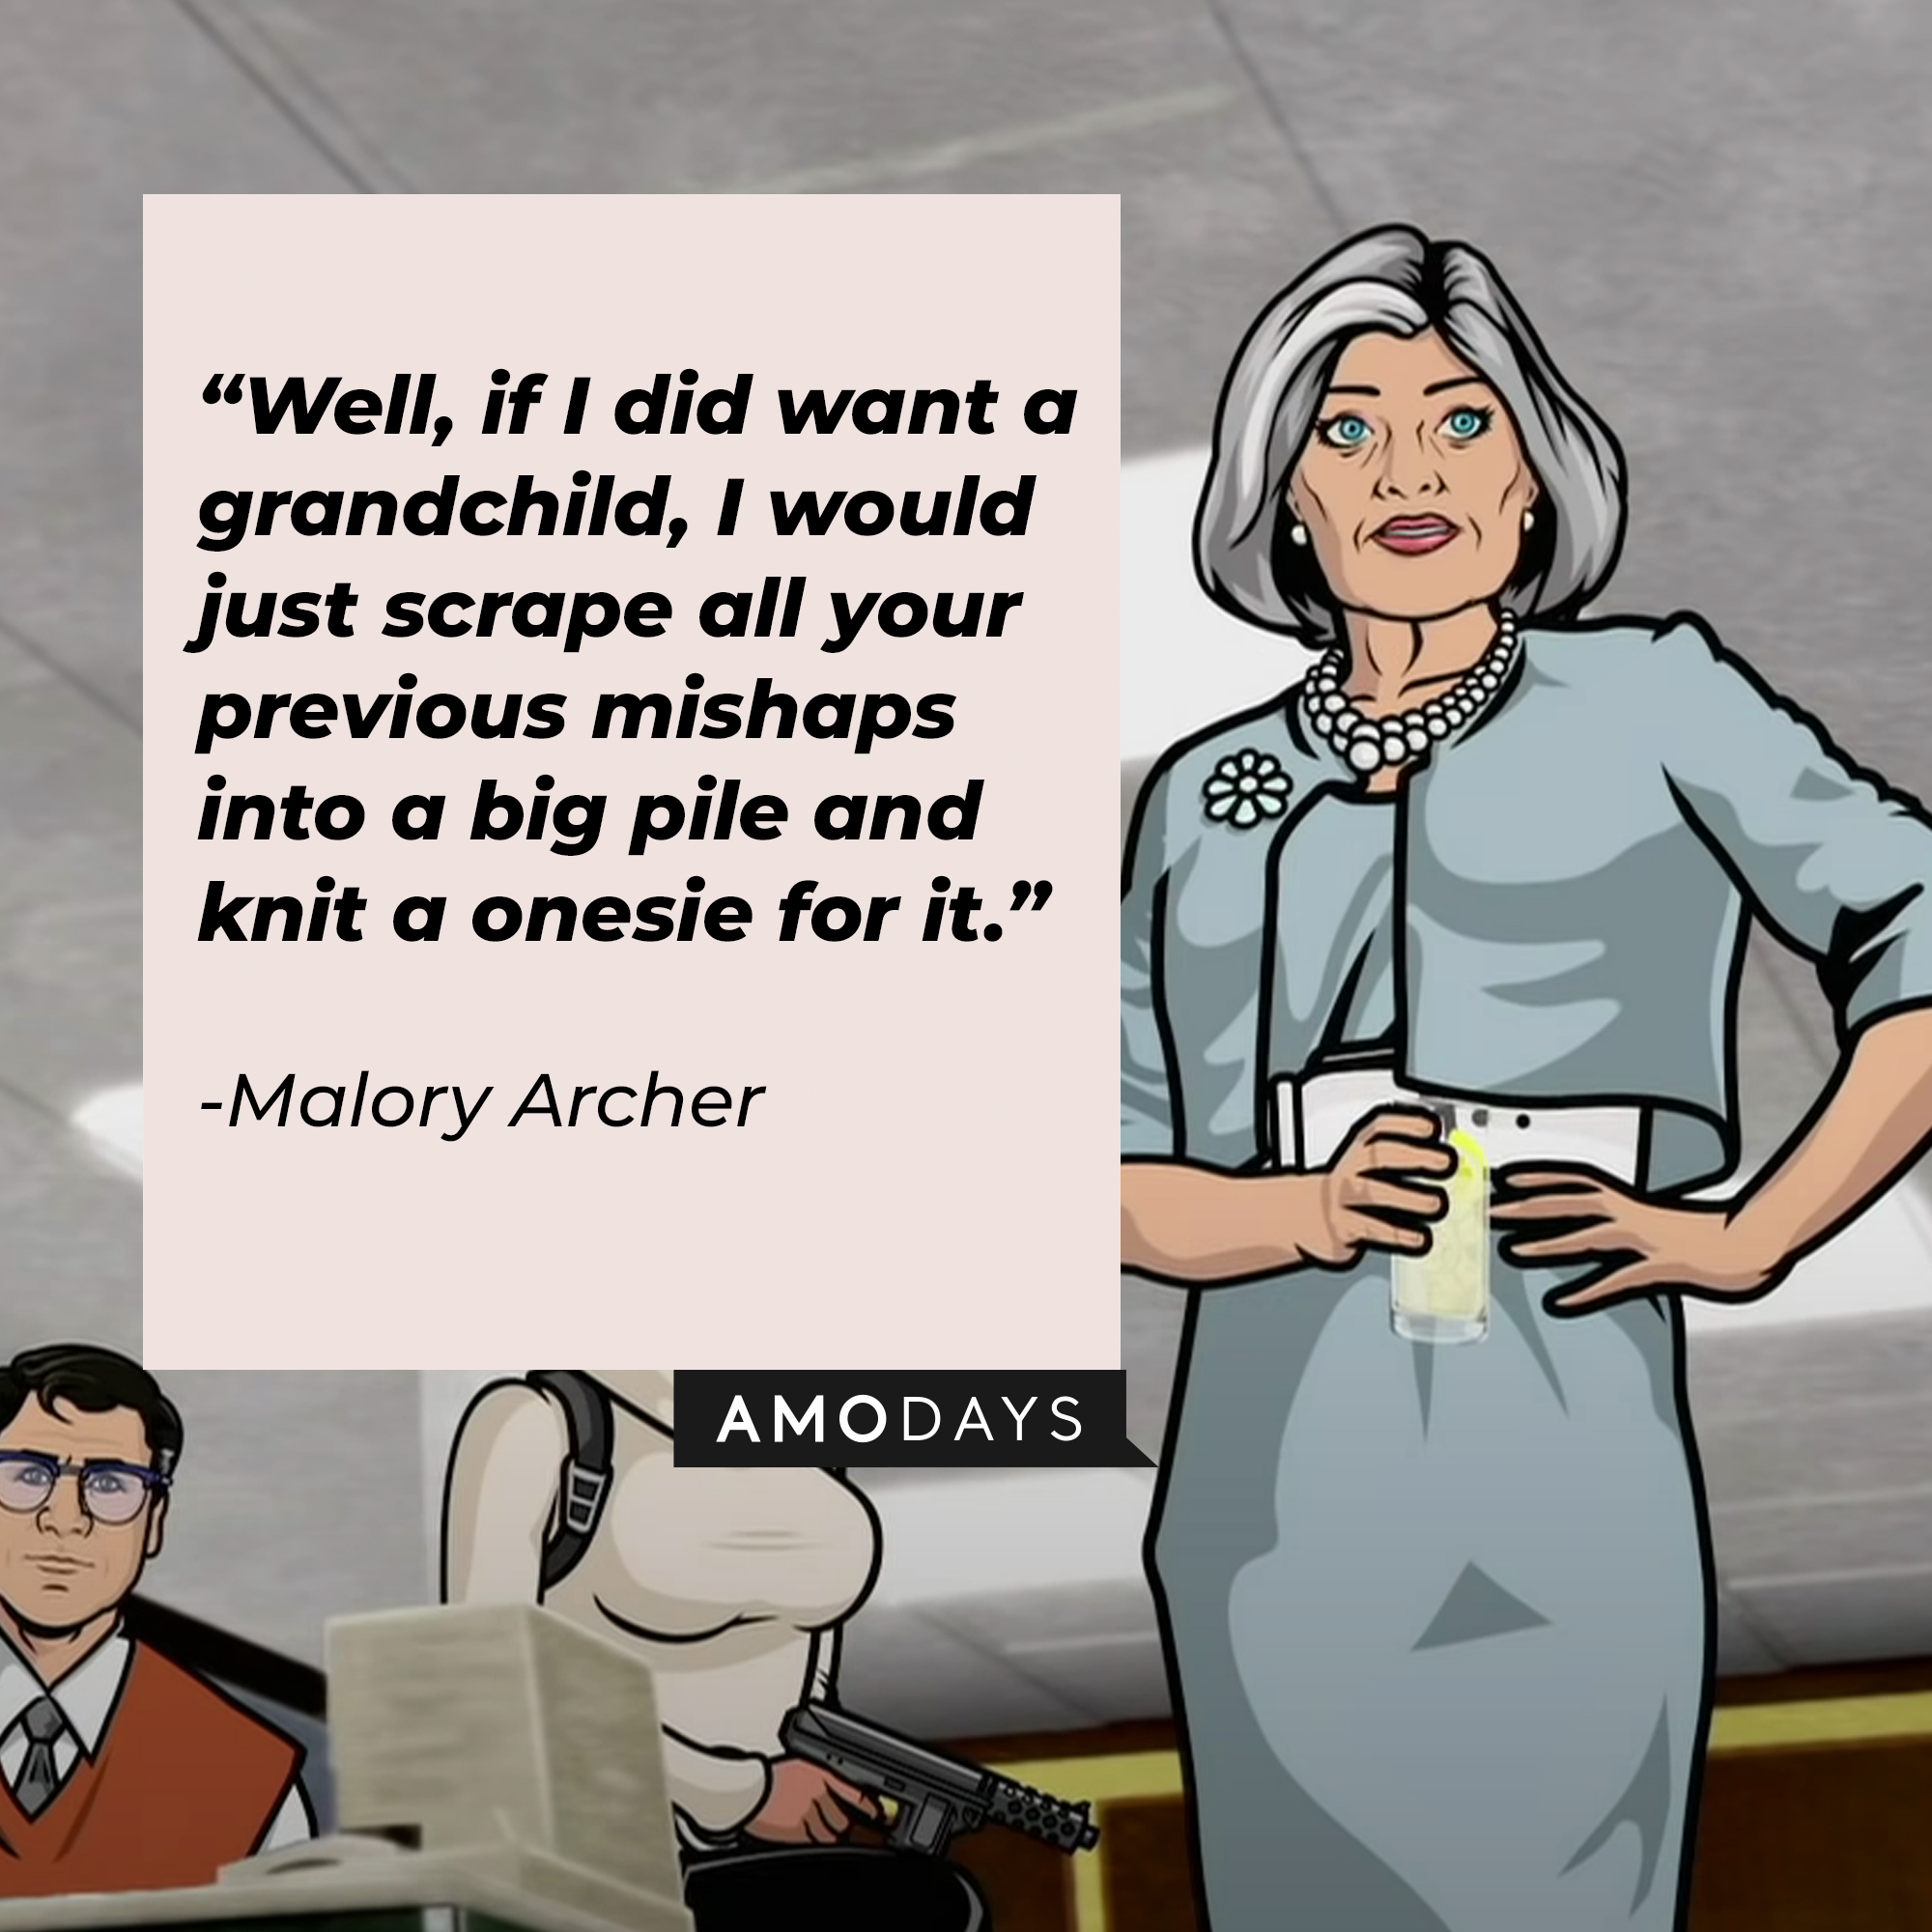 An Image of Malory Archer with her quote: “Well, if I did want a grandchild, I would just scrape all your previous mishaps into a big pile, and knit a onesie for it.” | Source: Youtube.com/Netflixnordic